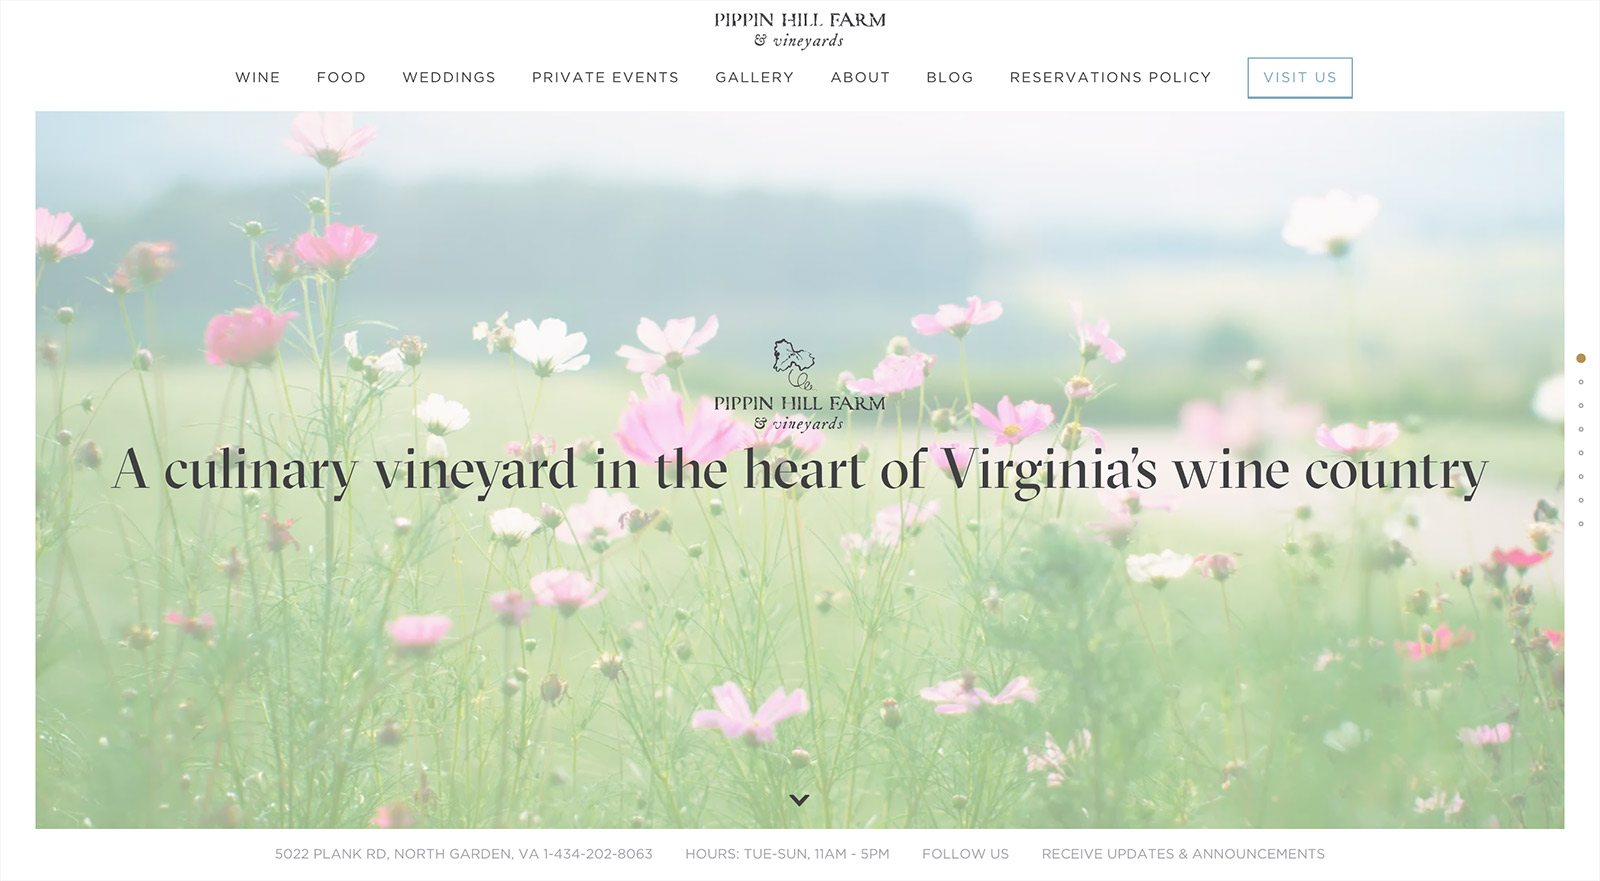 The winery website for Pippin Hill Farm & Vineyards